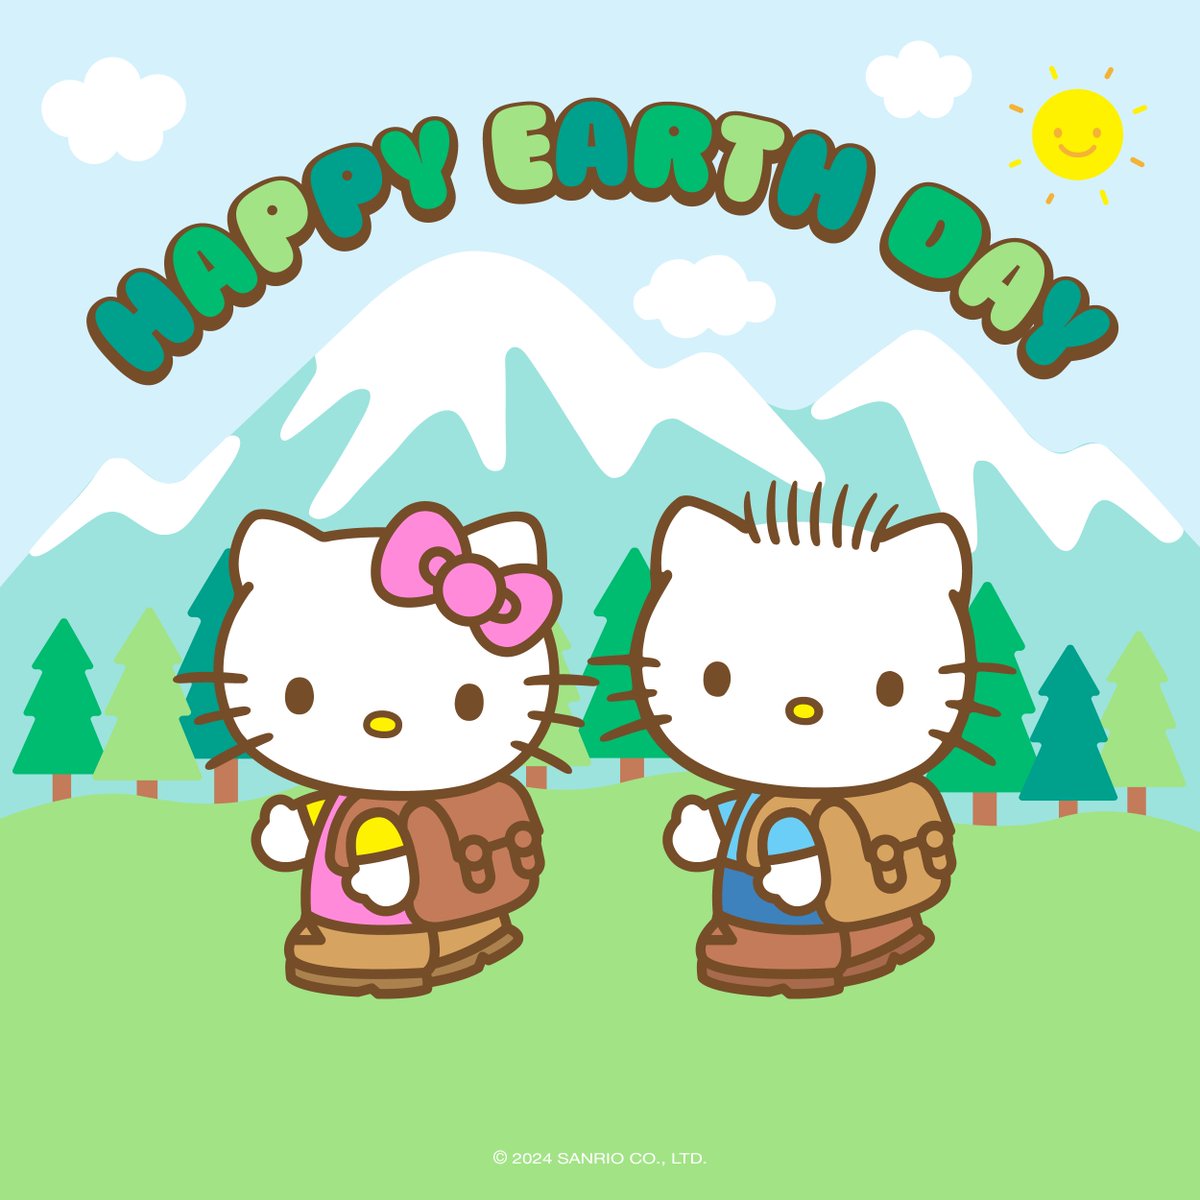 Hello Kitty and Dear Daniel are spending the day outdoors 💖🌎🌱 How are you celebrating #EarthDay?